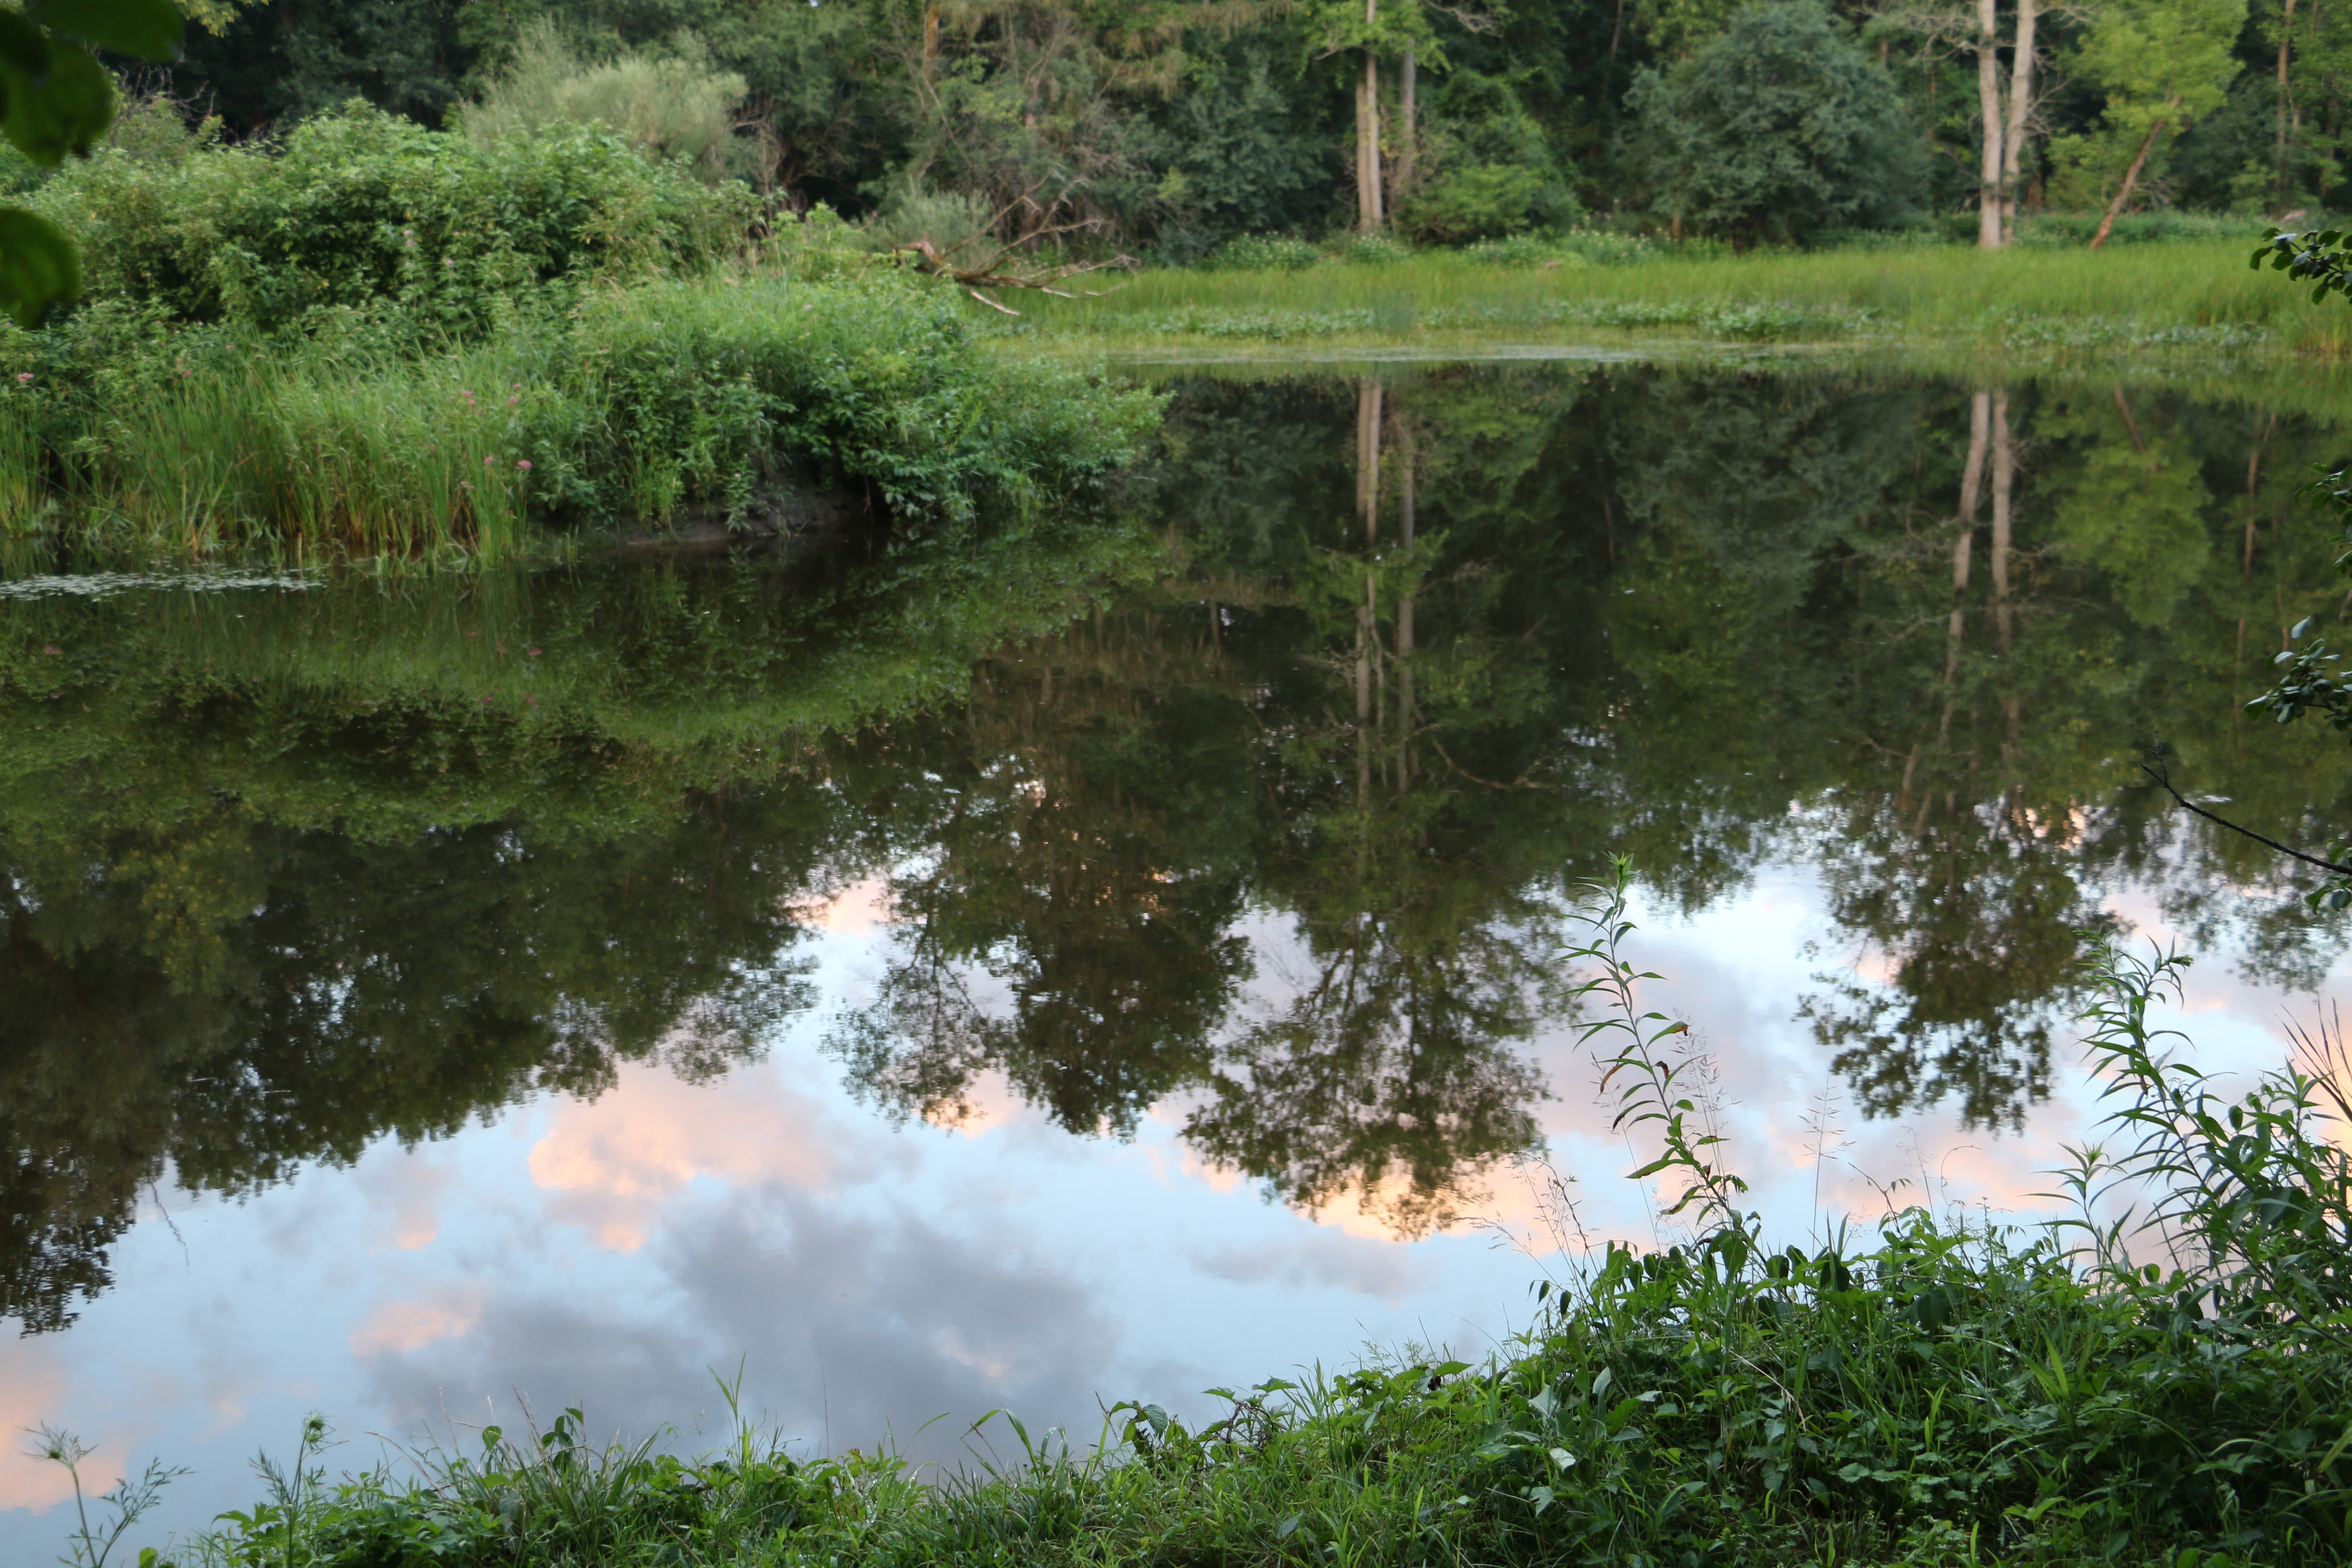 The reflection of a sunset in a wetland area, framed by trees and plants